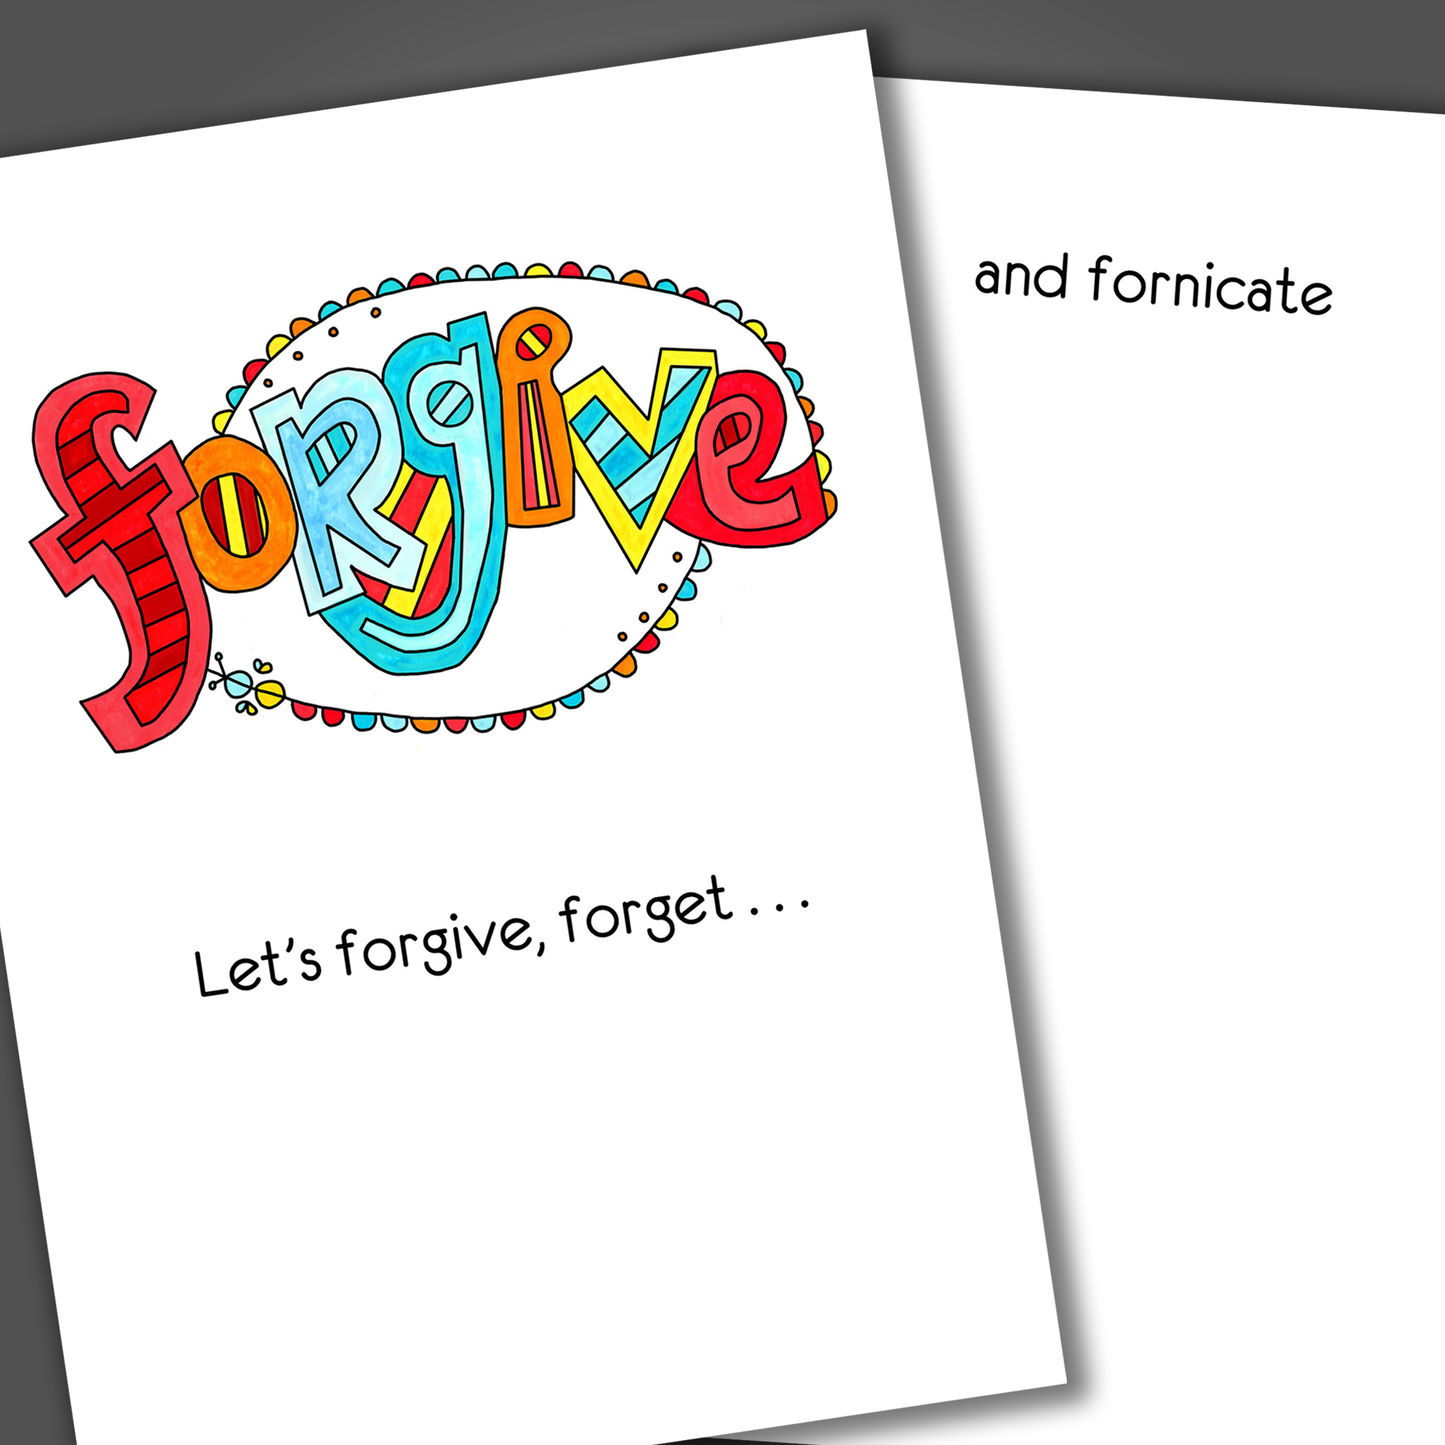 Funny I am sorry card with the word forgive drawn in multiple colors on the front of the card. Inside the card is a funny joke that says let's forgive, forget and fornicate!